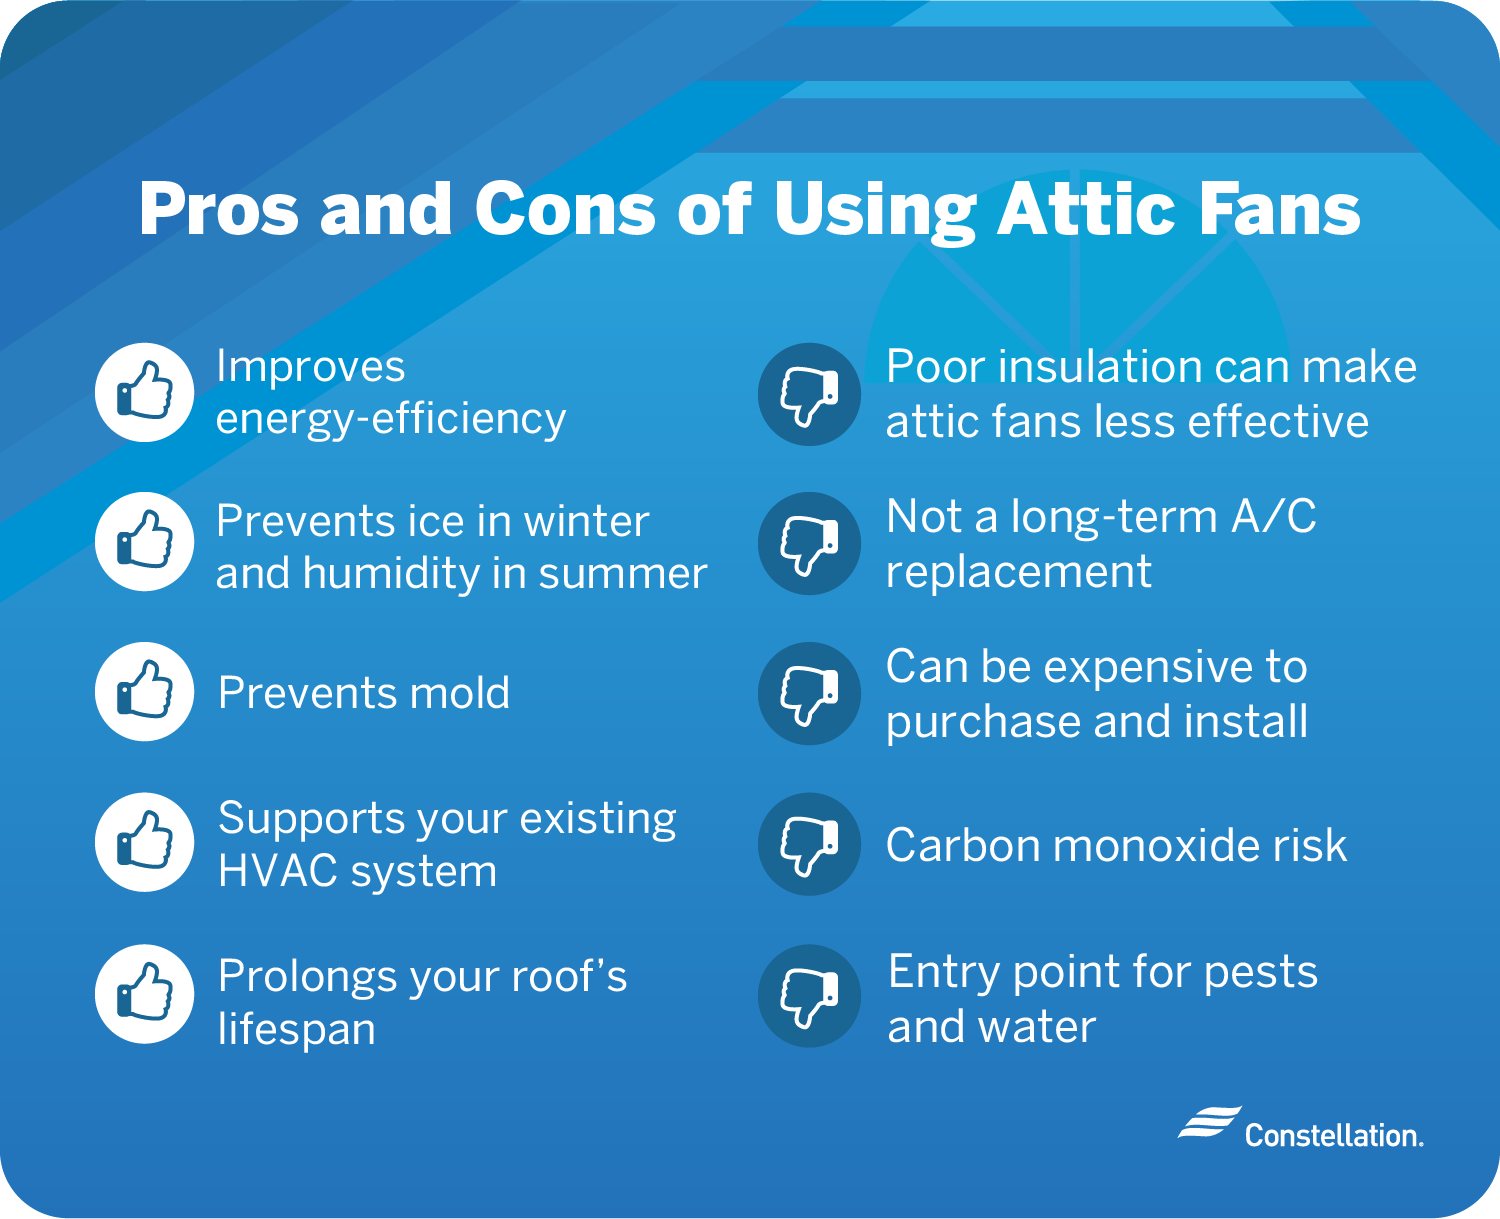 Pros and cons of using attic fans